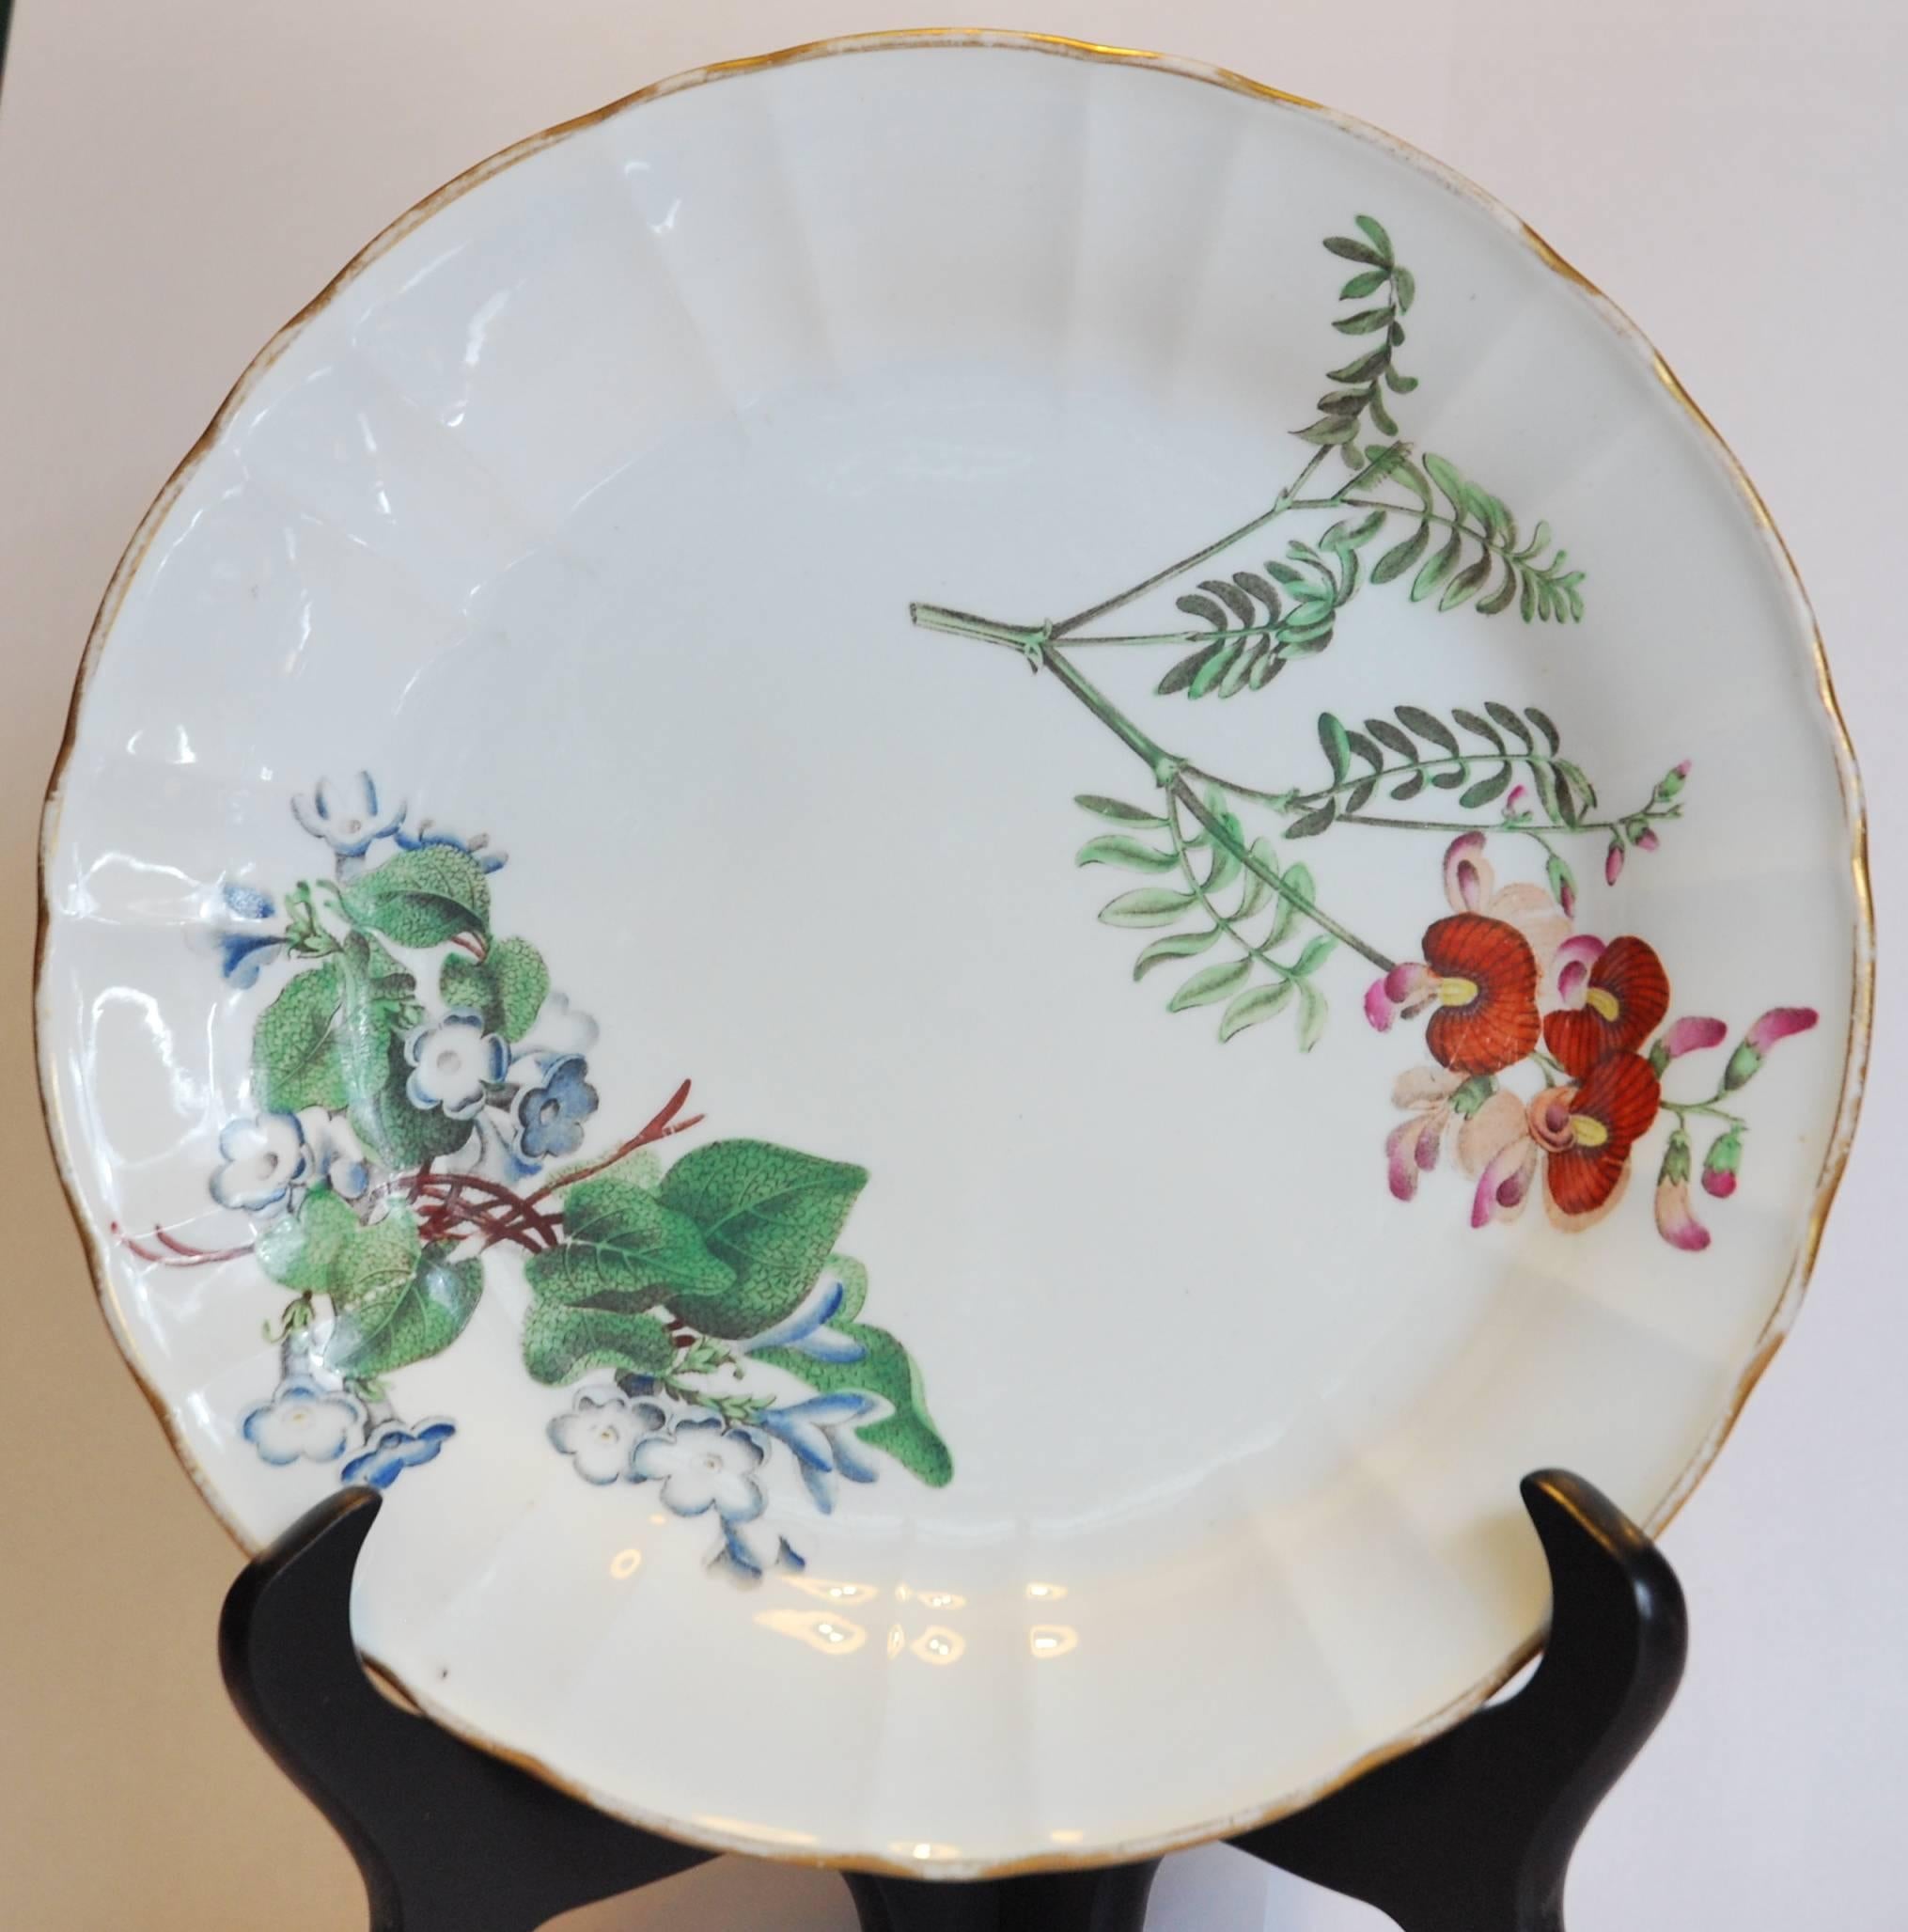 A rare set of six dessert plates, in bone china; printed and enameled with botanical designs probably from prints of the period. First Period Bone china was made only for about 10 years, as it was not a commercial success; probably because Wedgwood